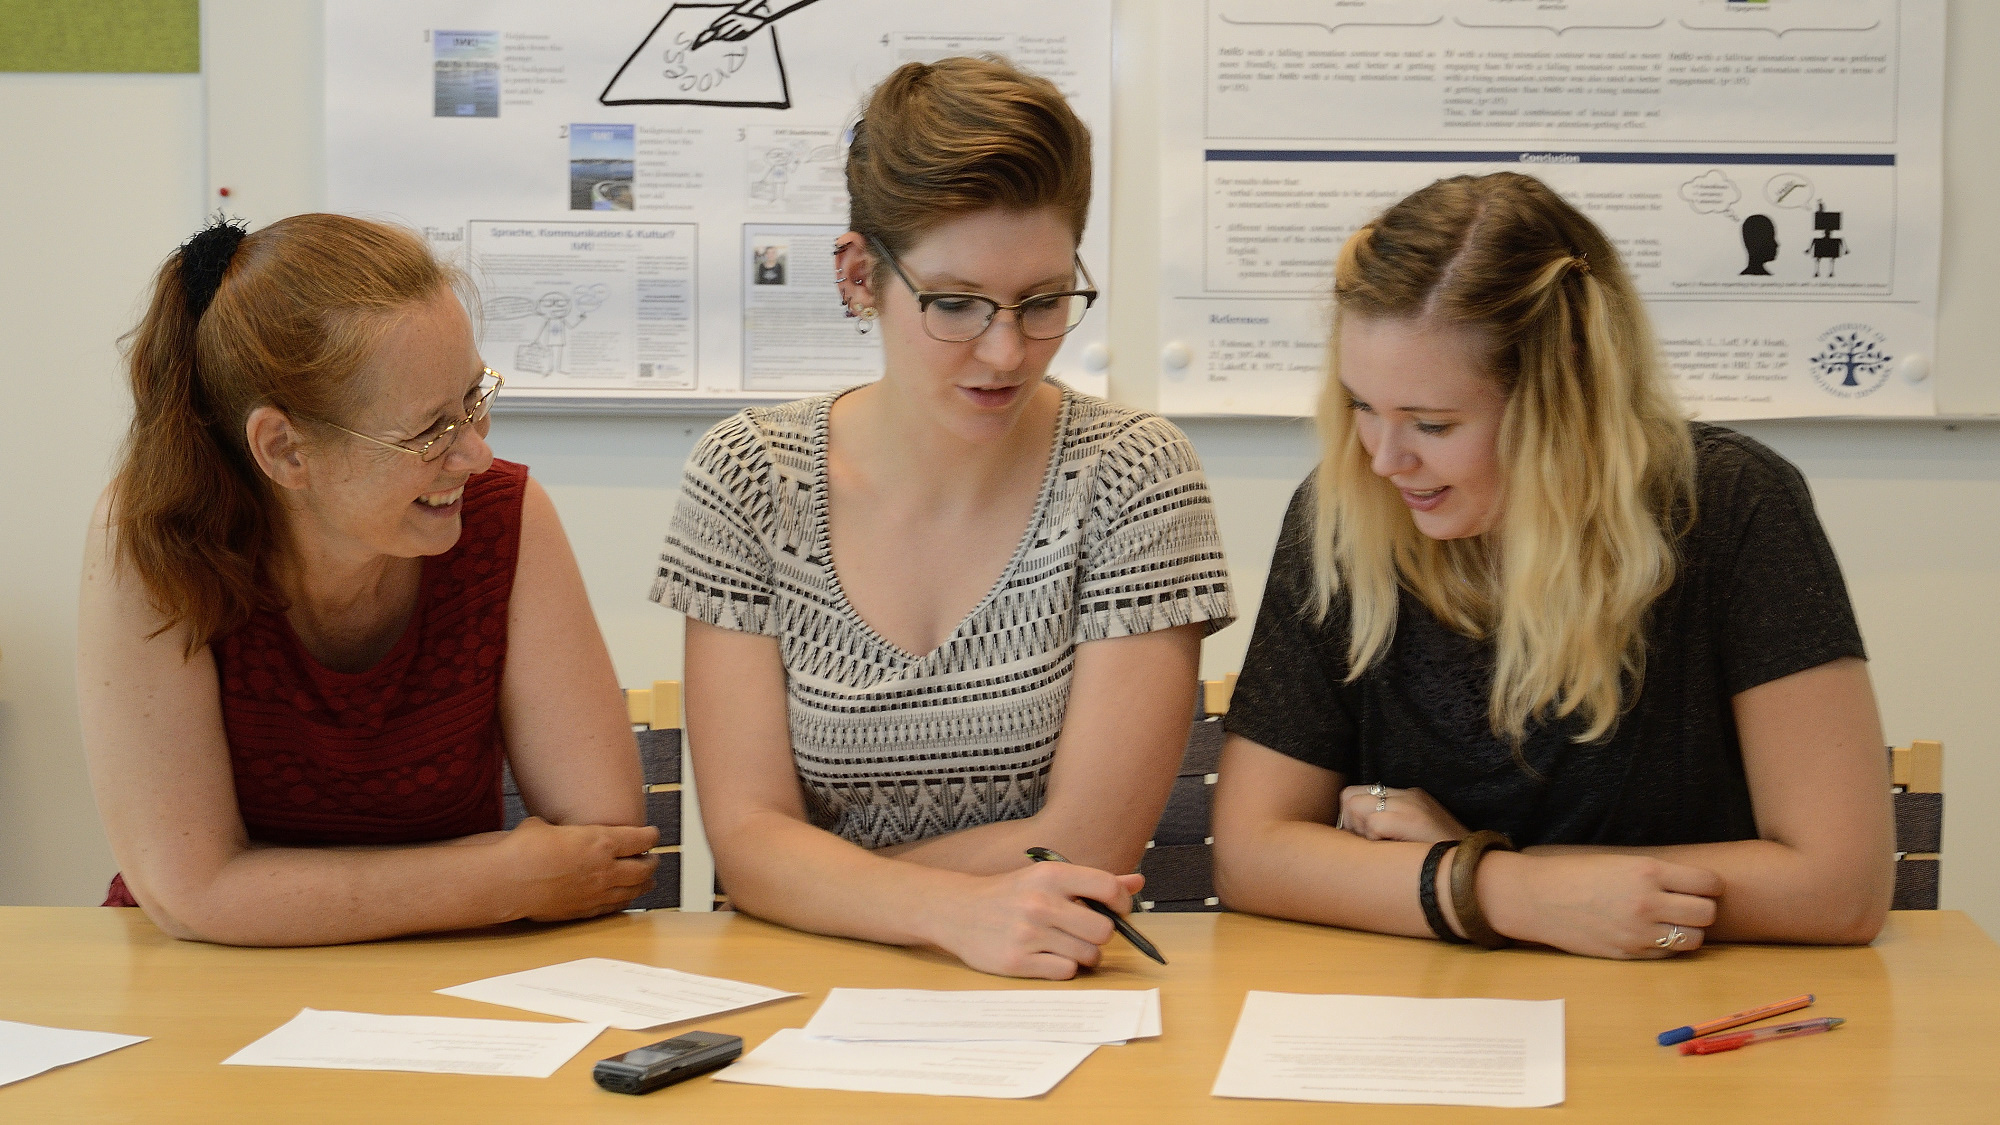 Developing research methods is teamwork: Kerstin Fischer, Nathalie Schümchen and Rosalyn Langedijk join forces (left to right).